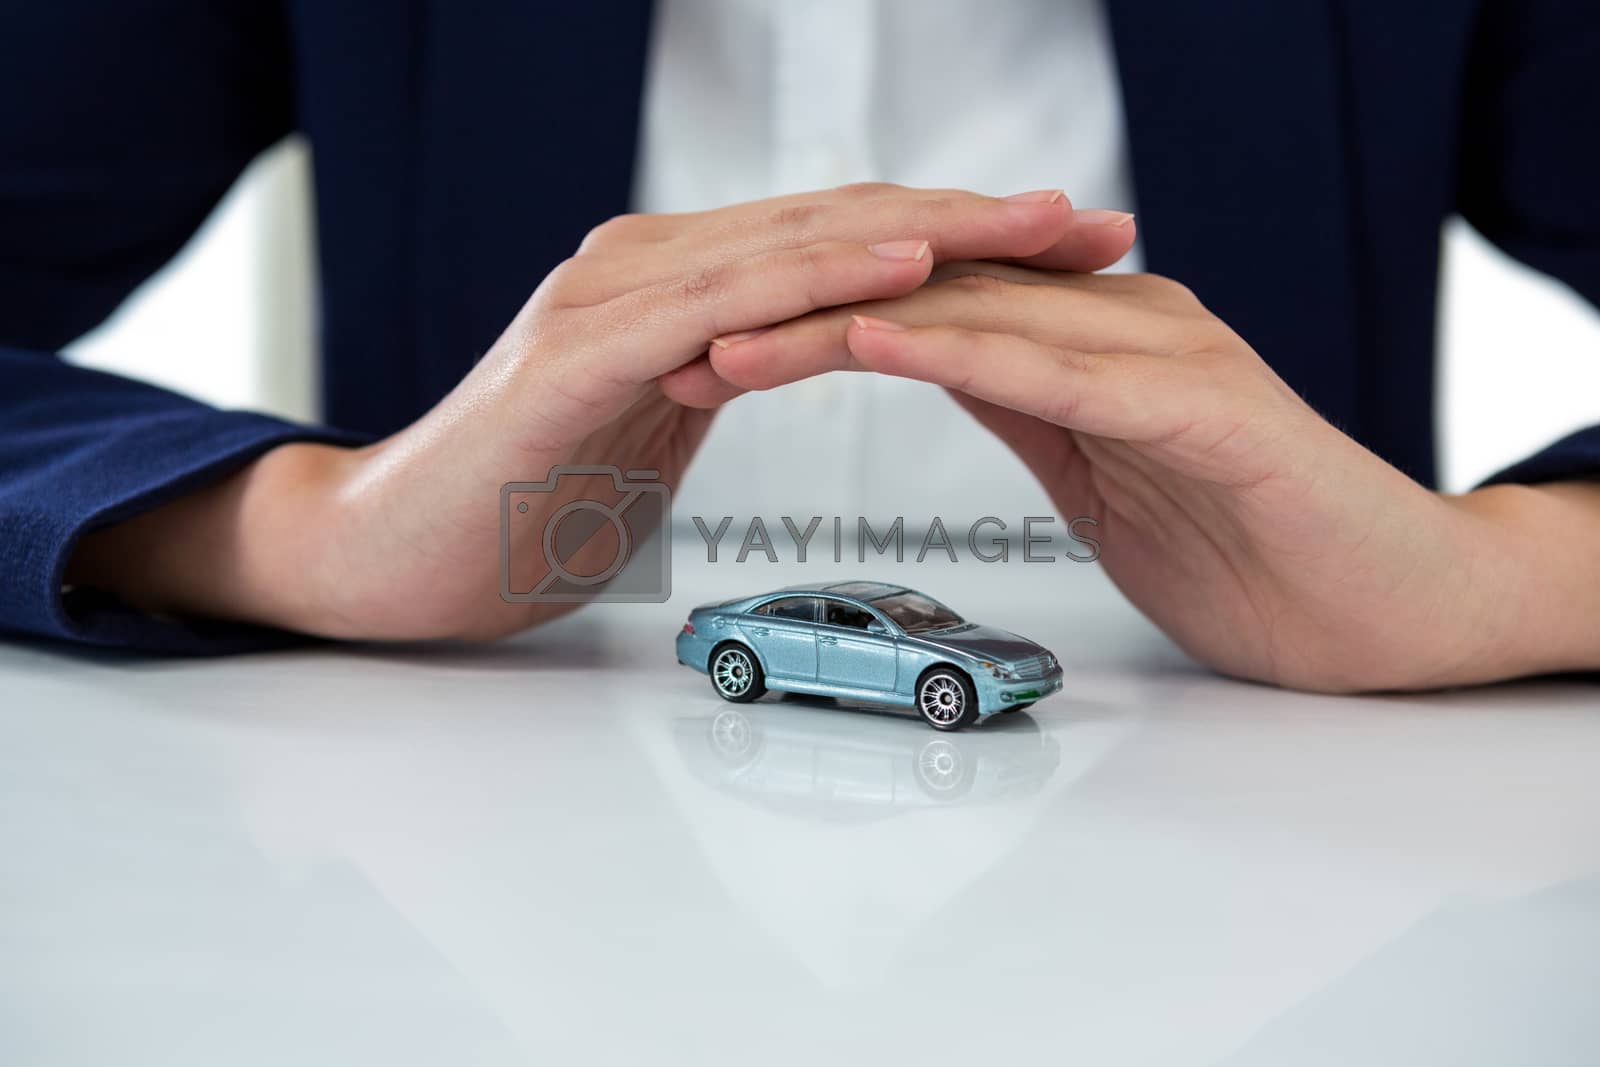 Royalty free image of Businesswoman protecting toy car with hands by Wavebreakmedia